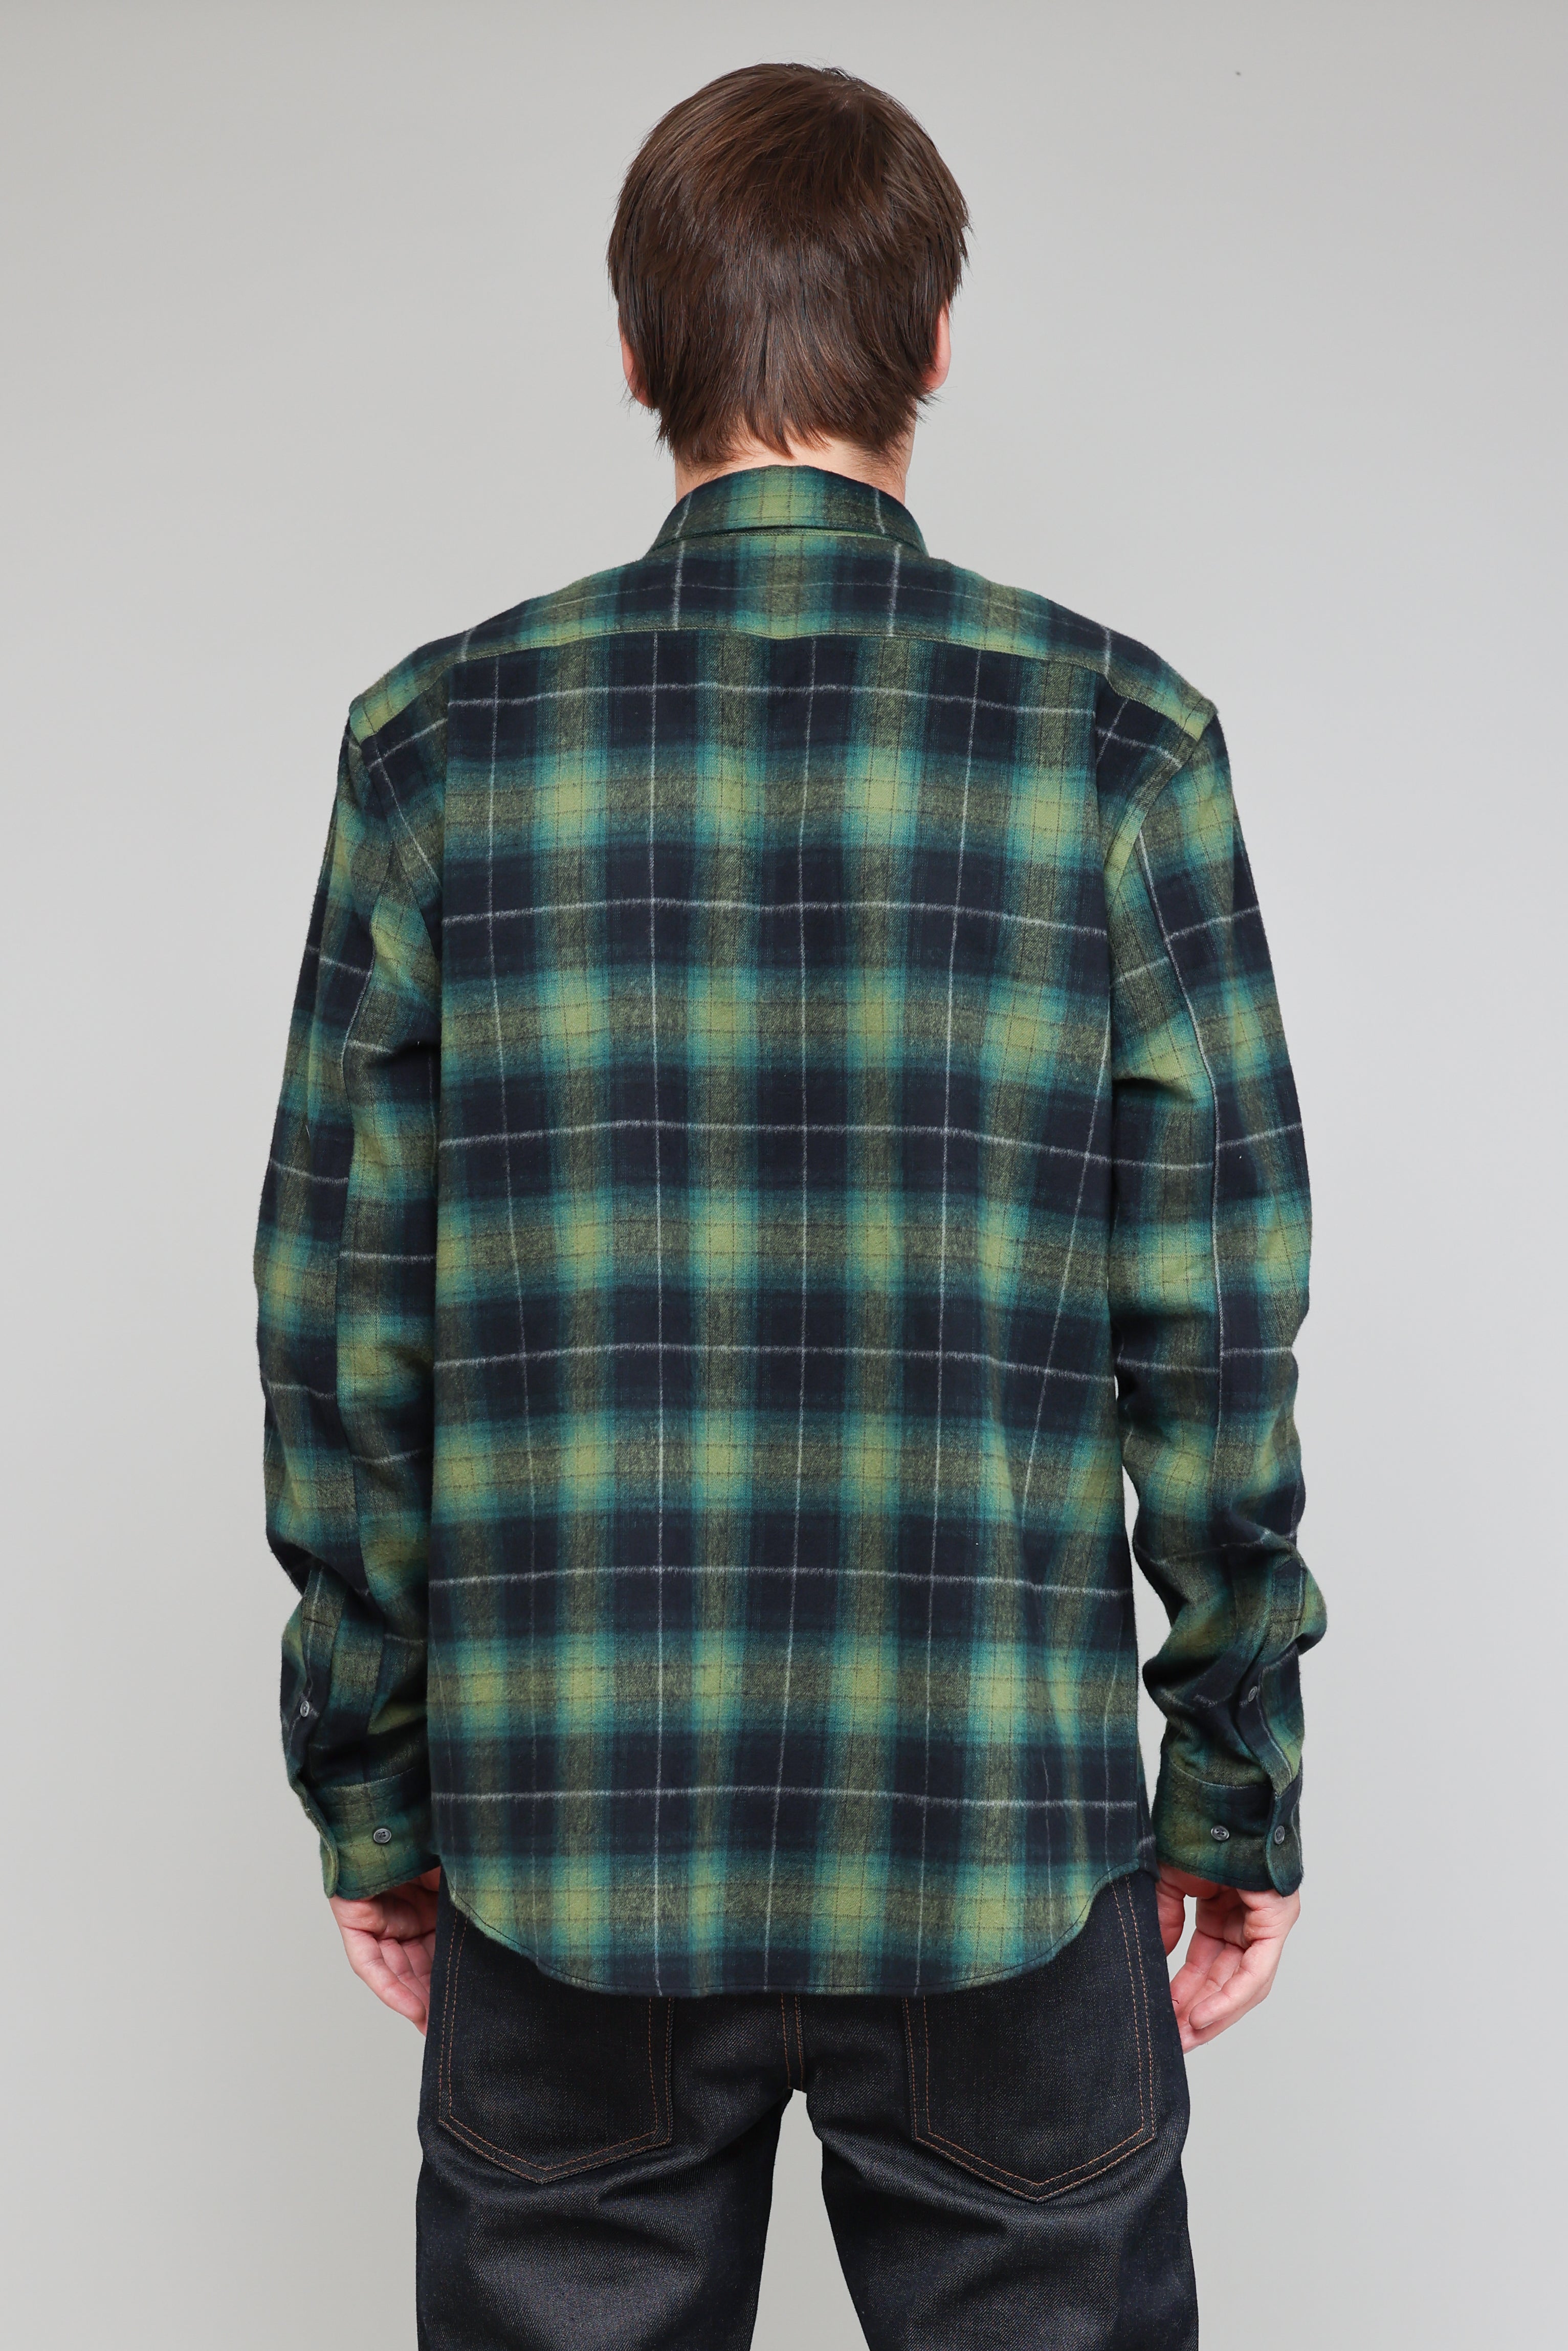 Japanese Shaggy Plaid in Green and Navy 03